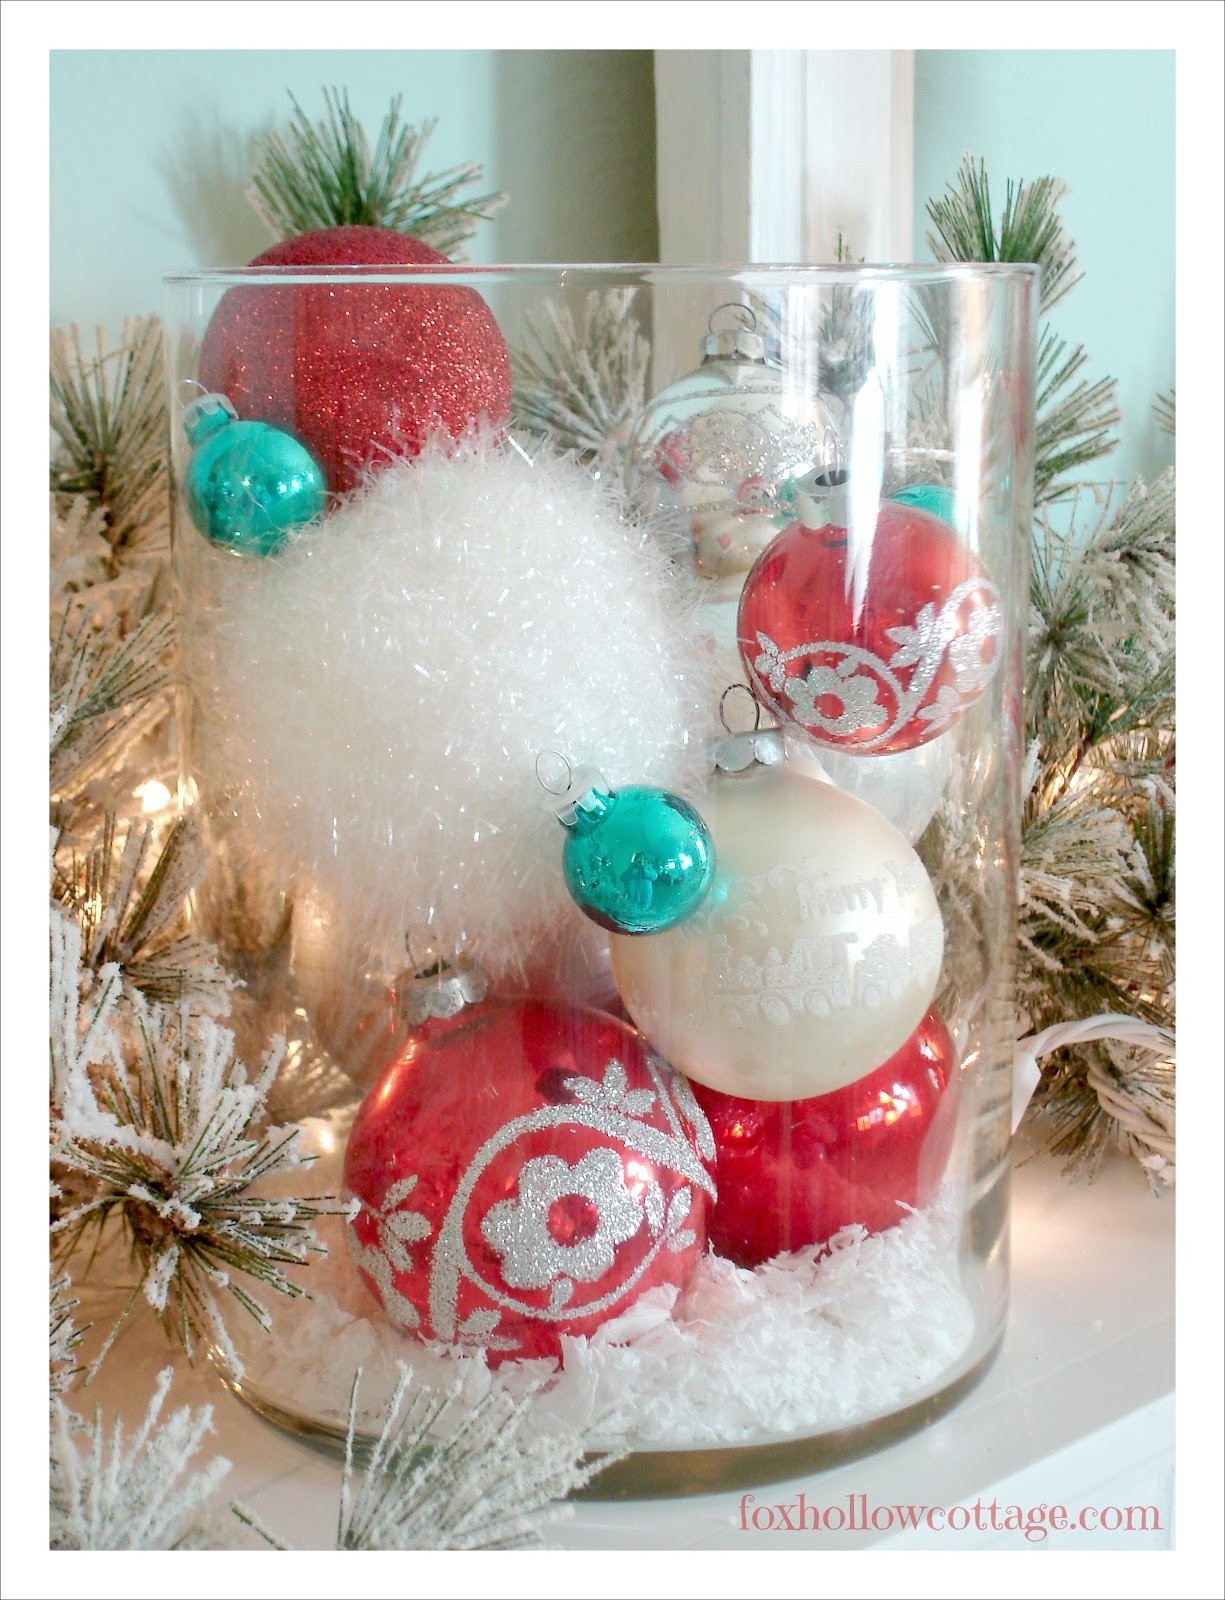 DIY Christmas Decor Ideas
 10 Quick Ideas For Decorating With Christmas Ornaments